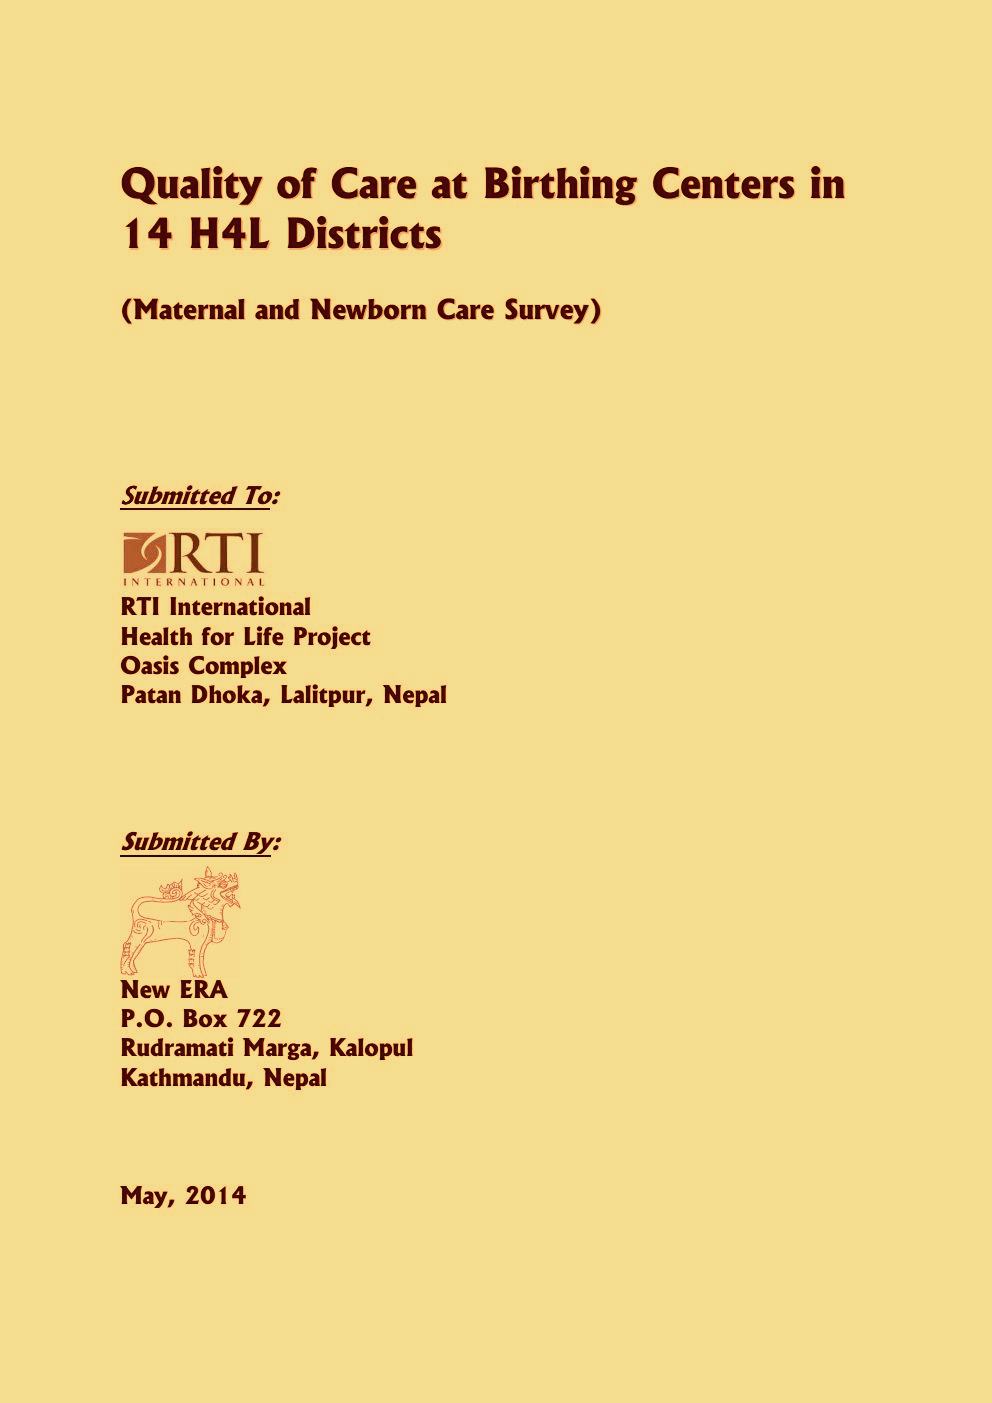 Quality of Care at Birthing Centers in 14 H4L Districts